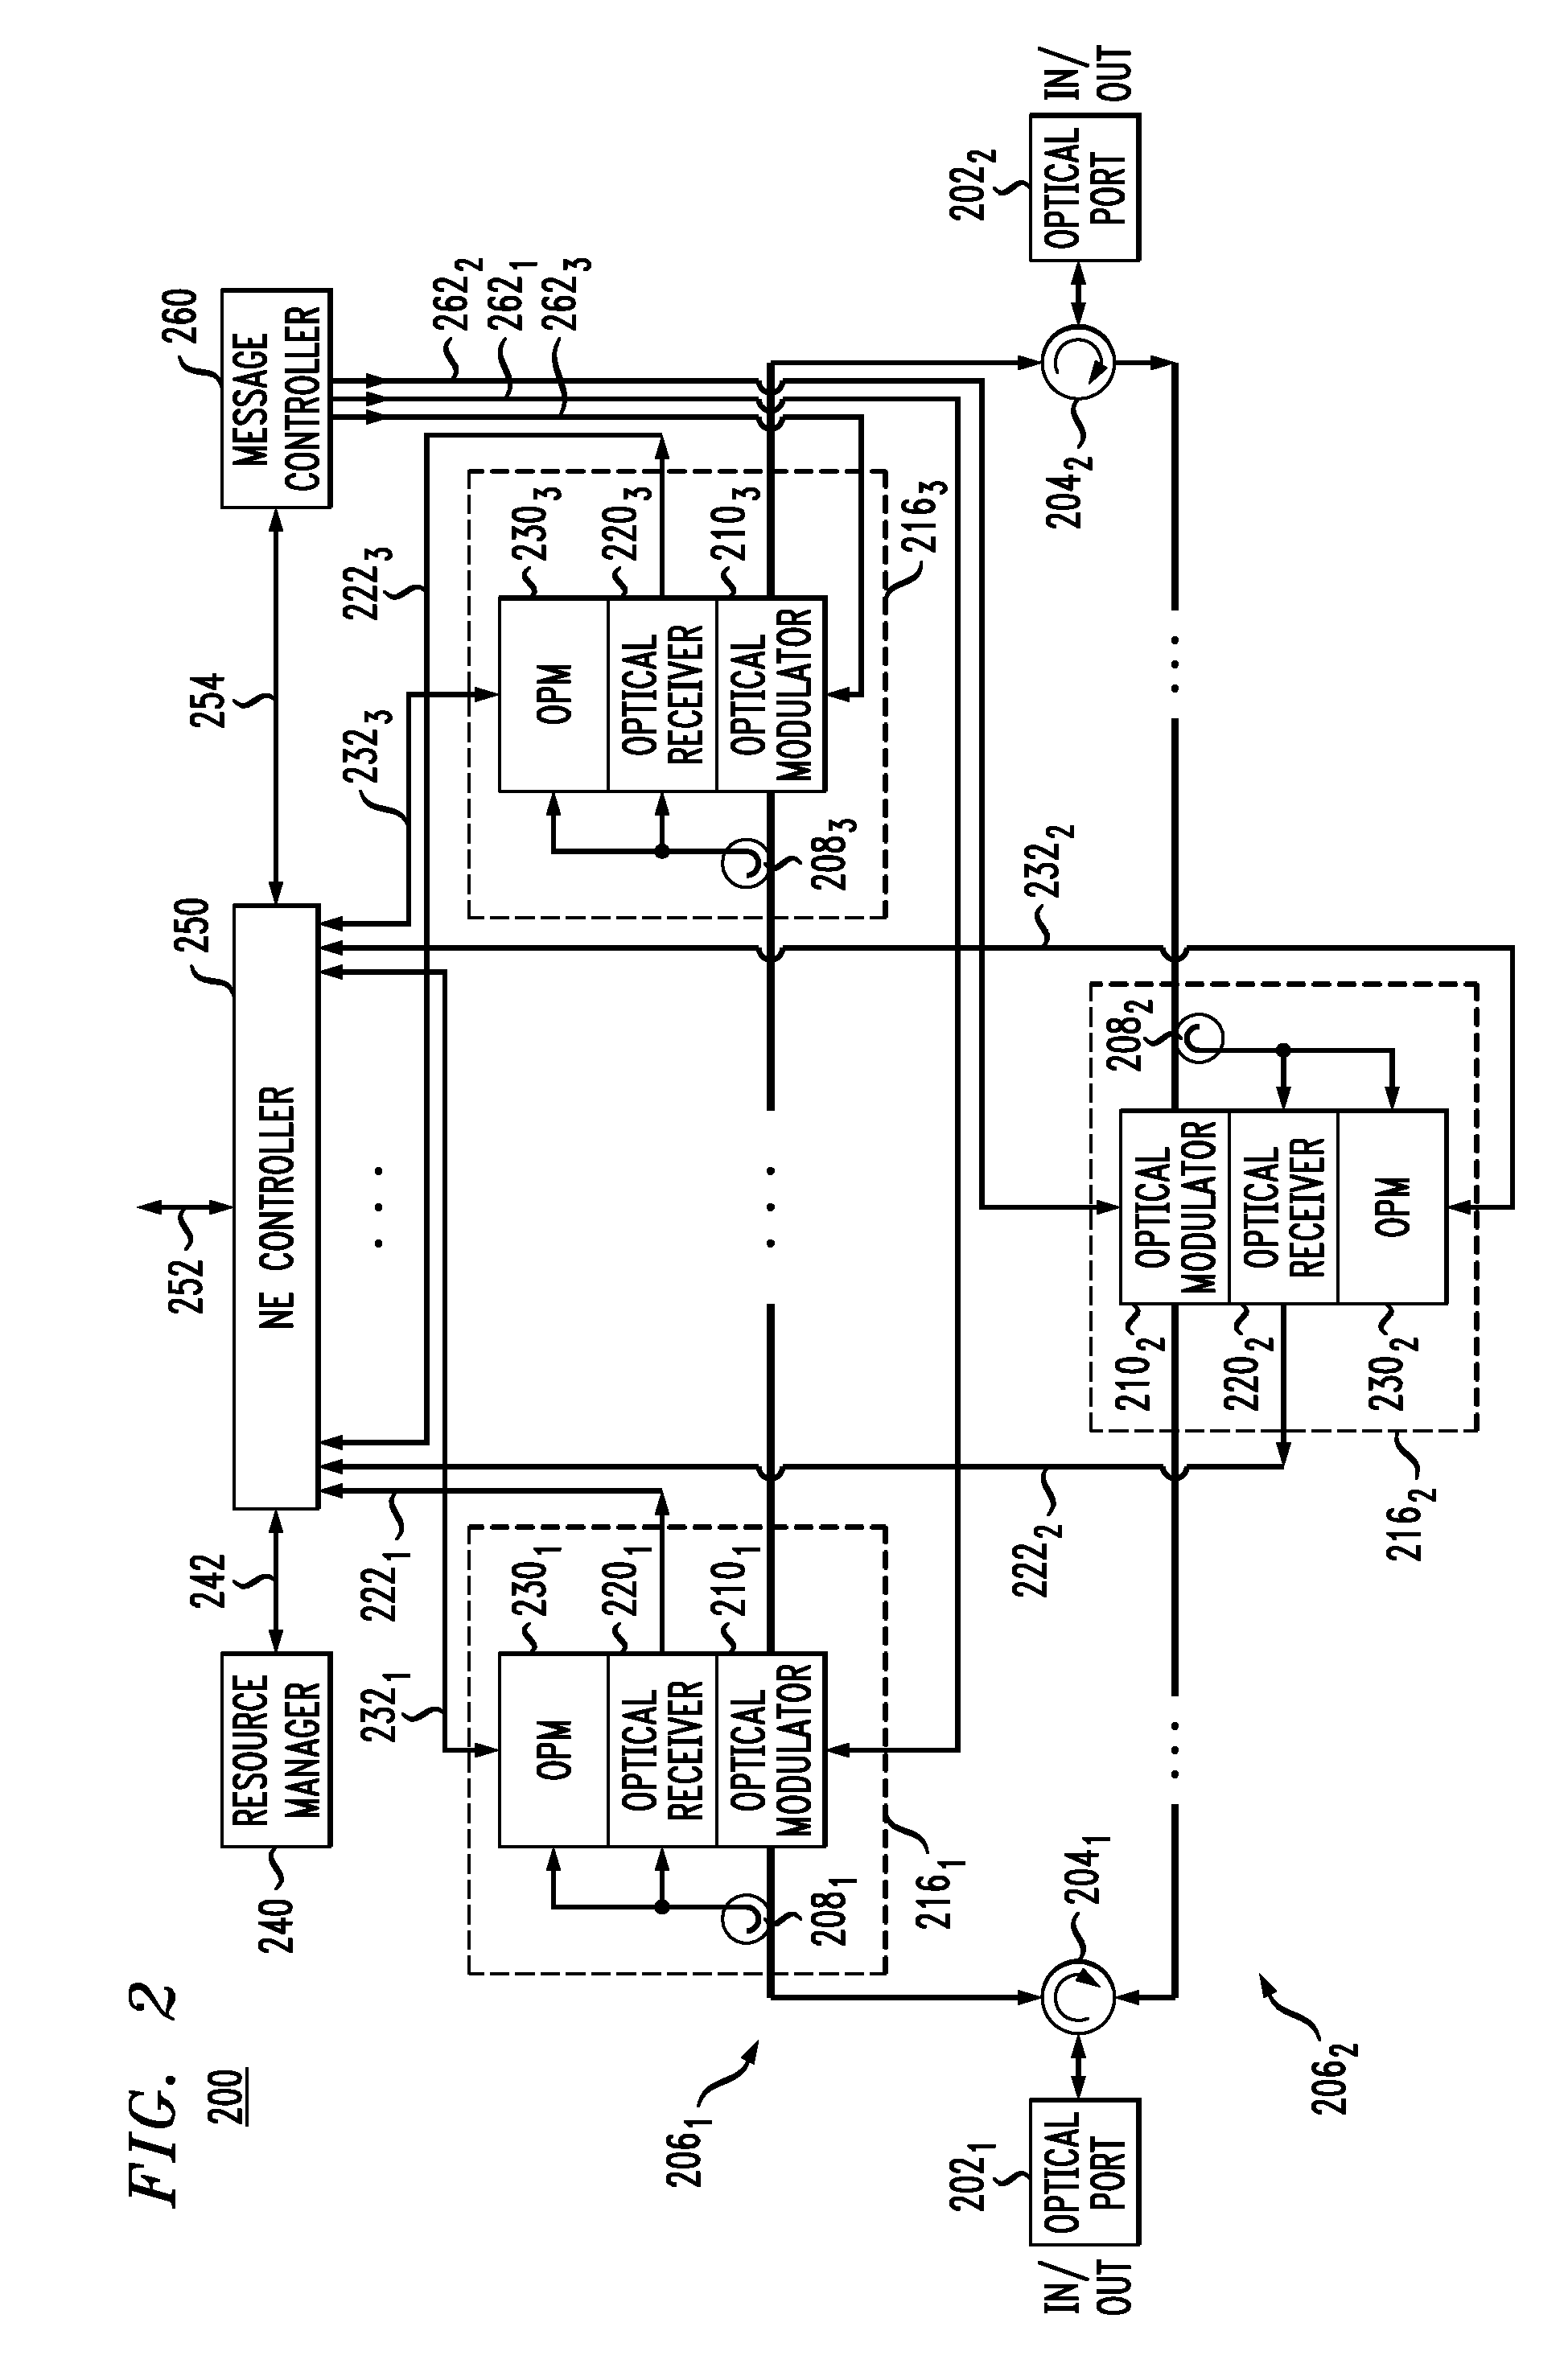 Operations administration and management service for an optical layer of a communication network